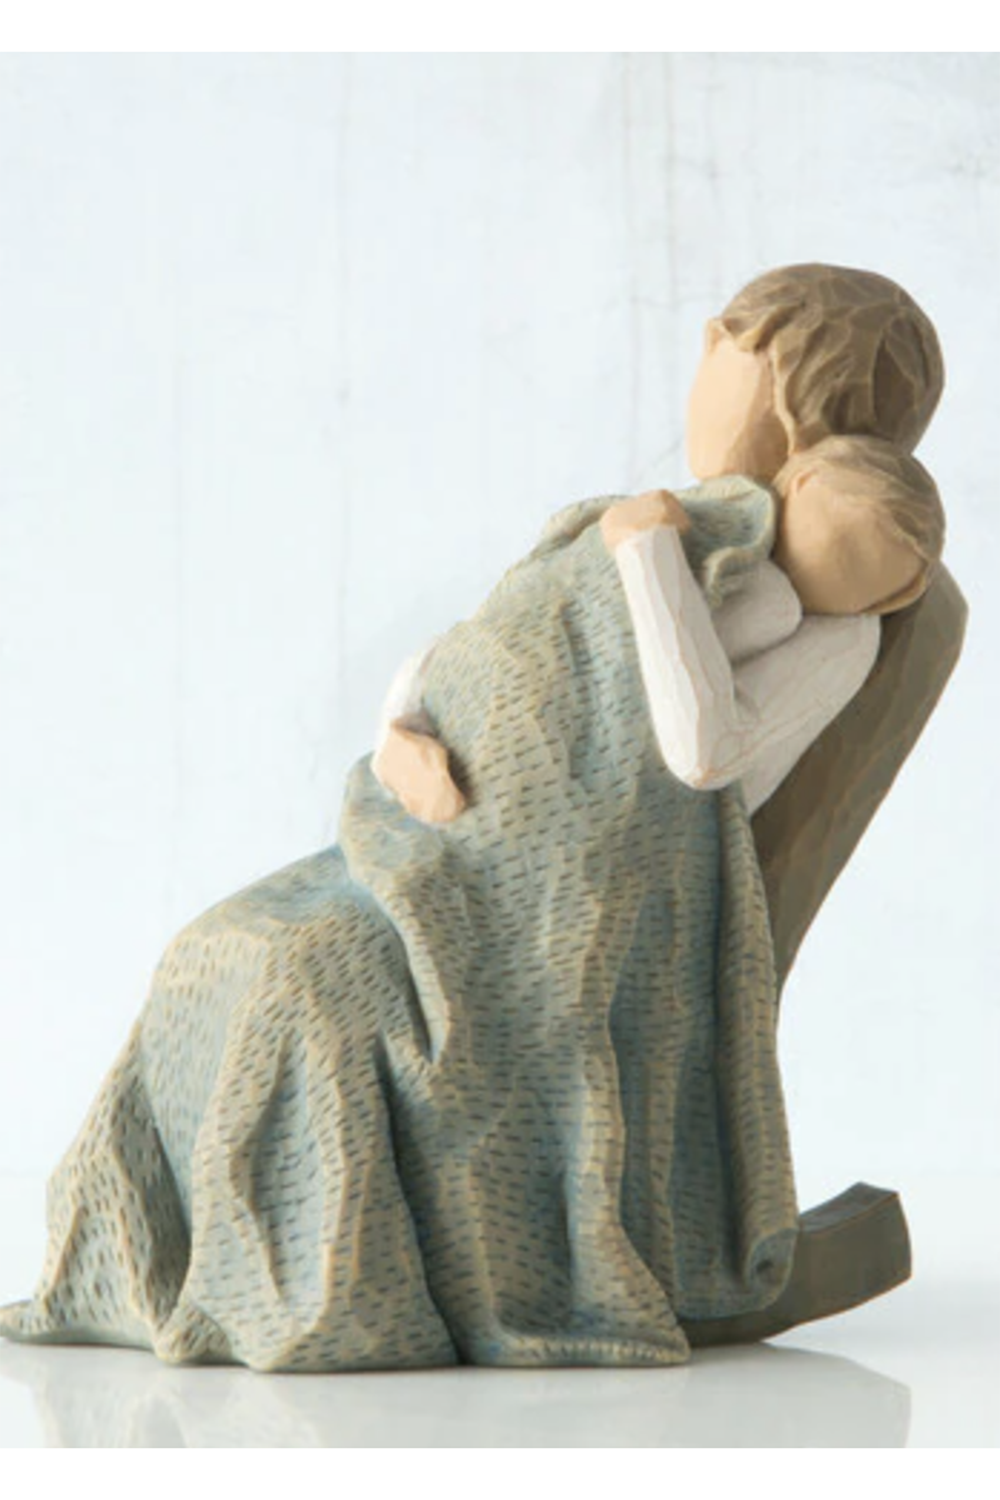 Willow Tree Figure - The Quilt